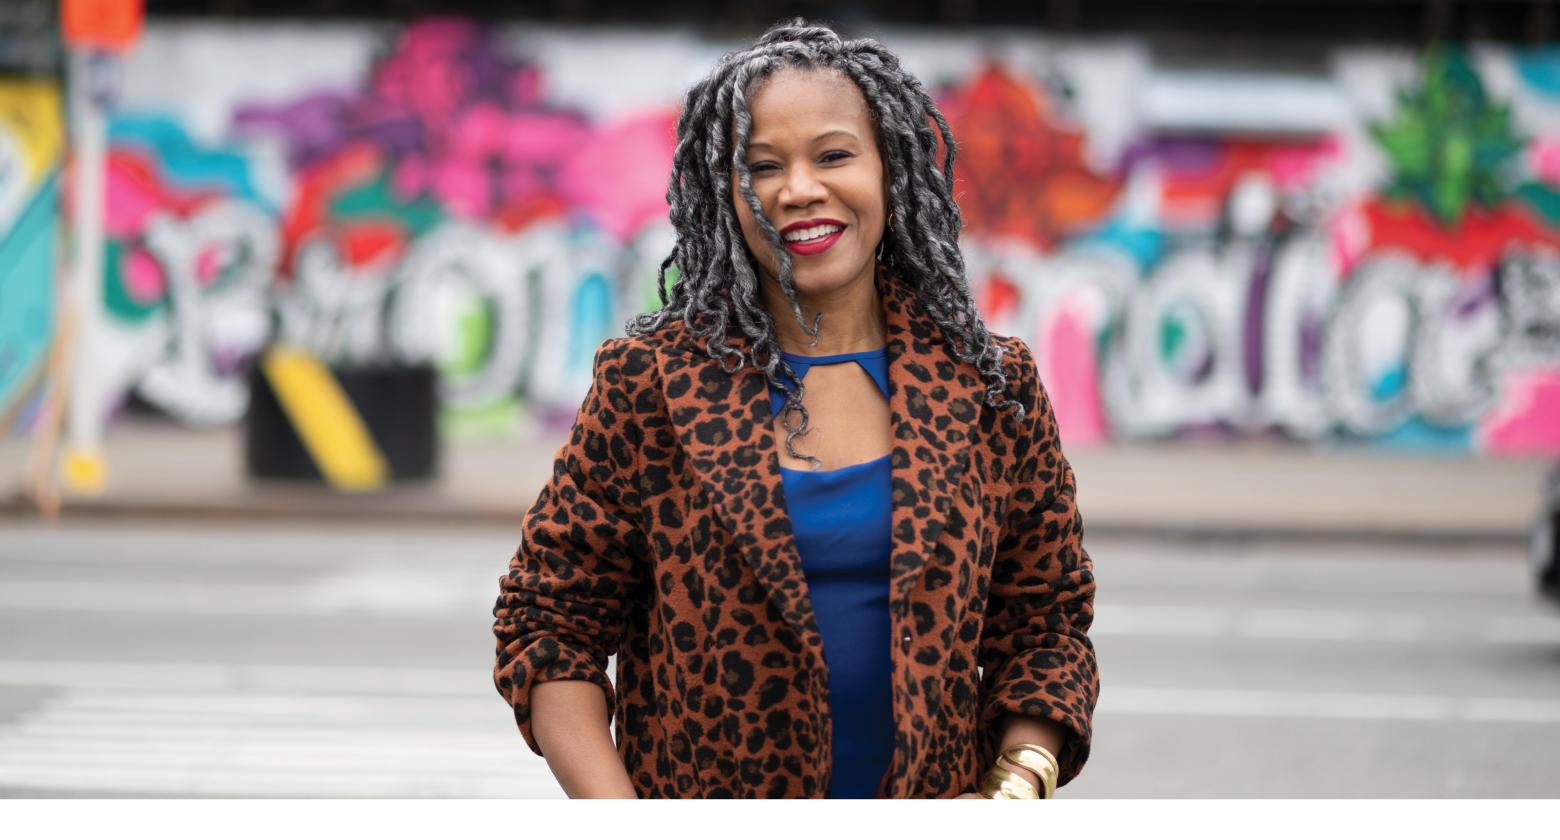 [image] Majora Carter on the Power of Imagination and Greening the Ghetto